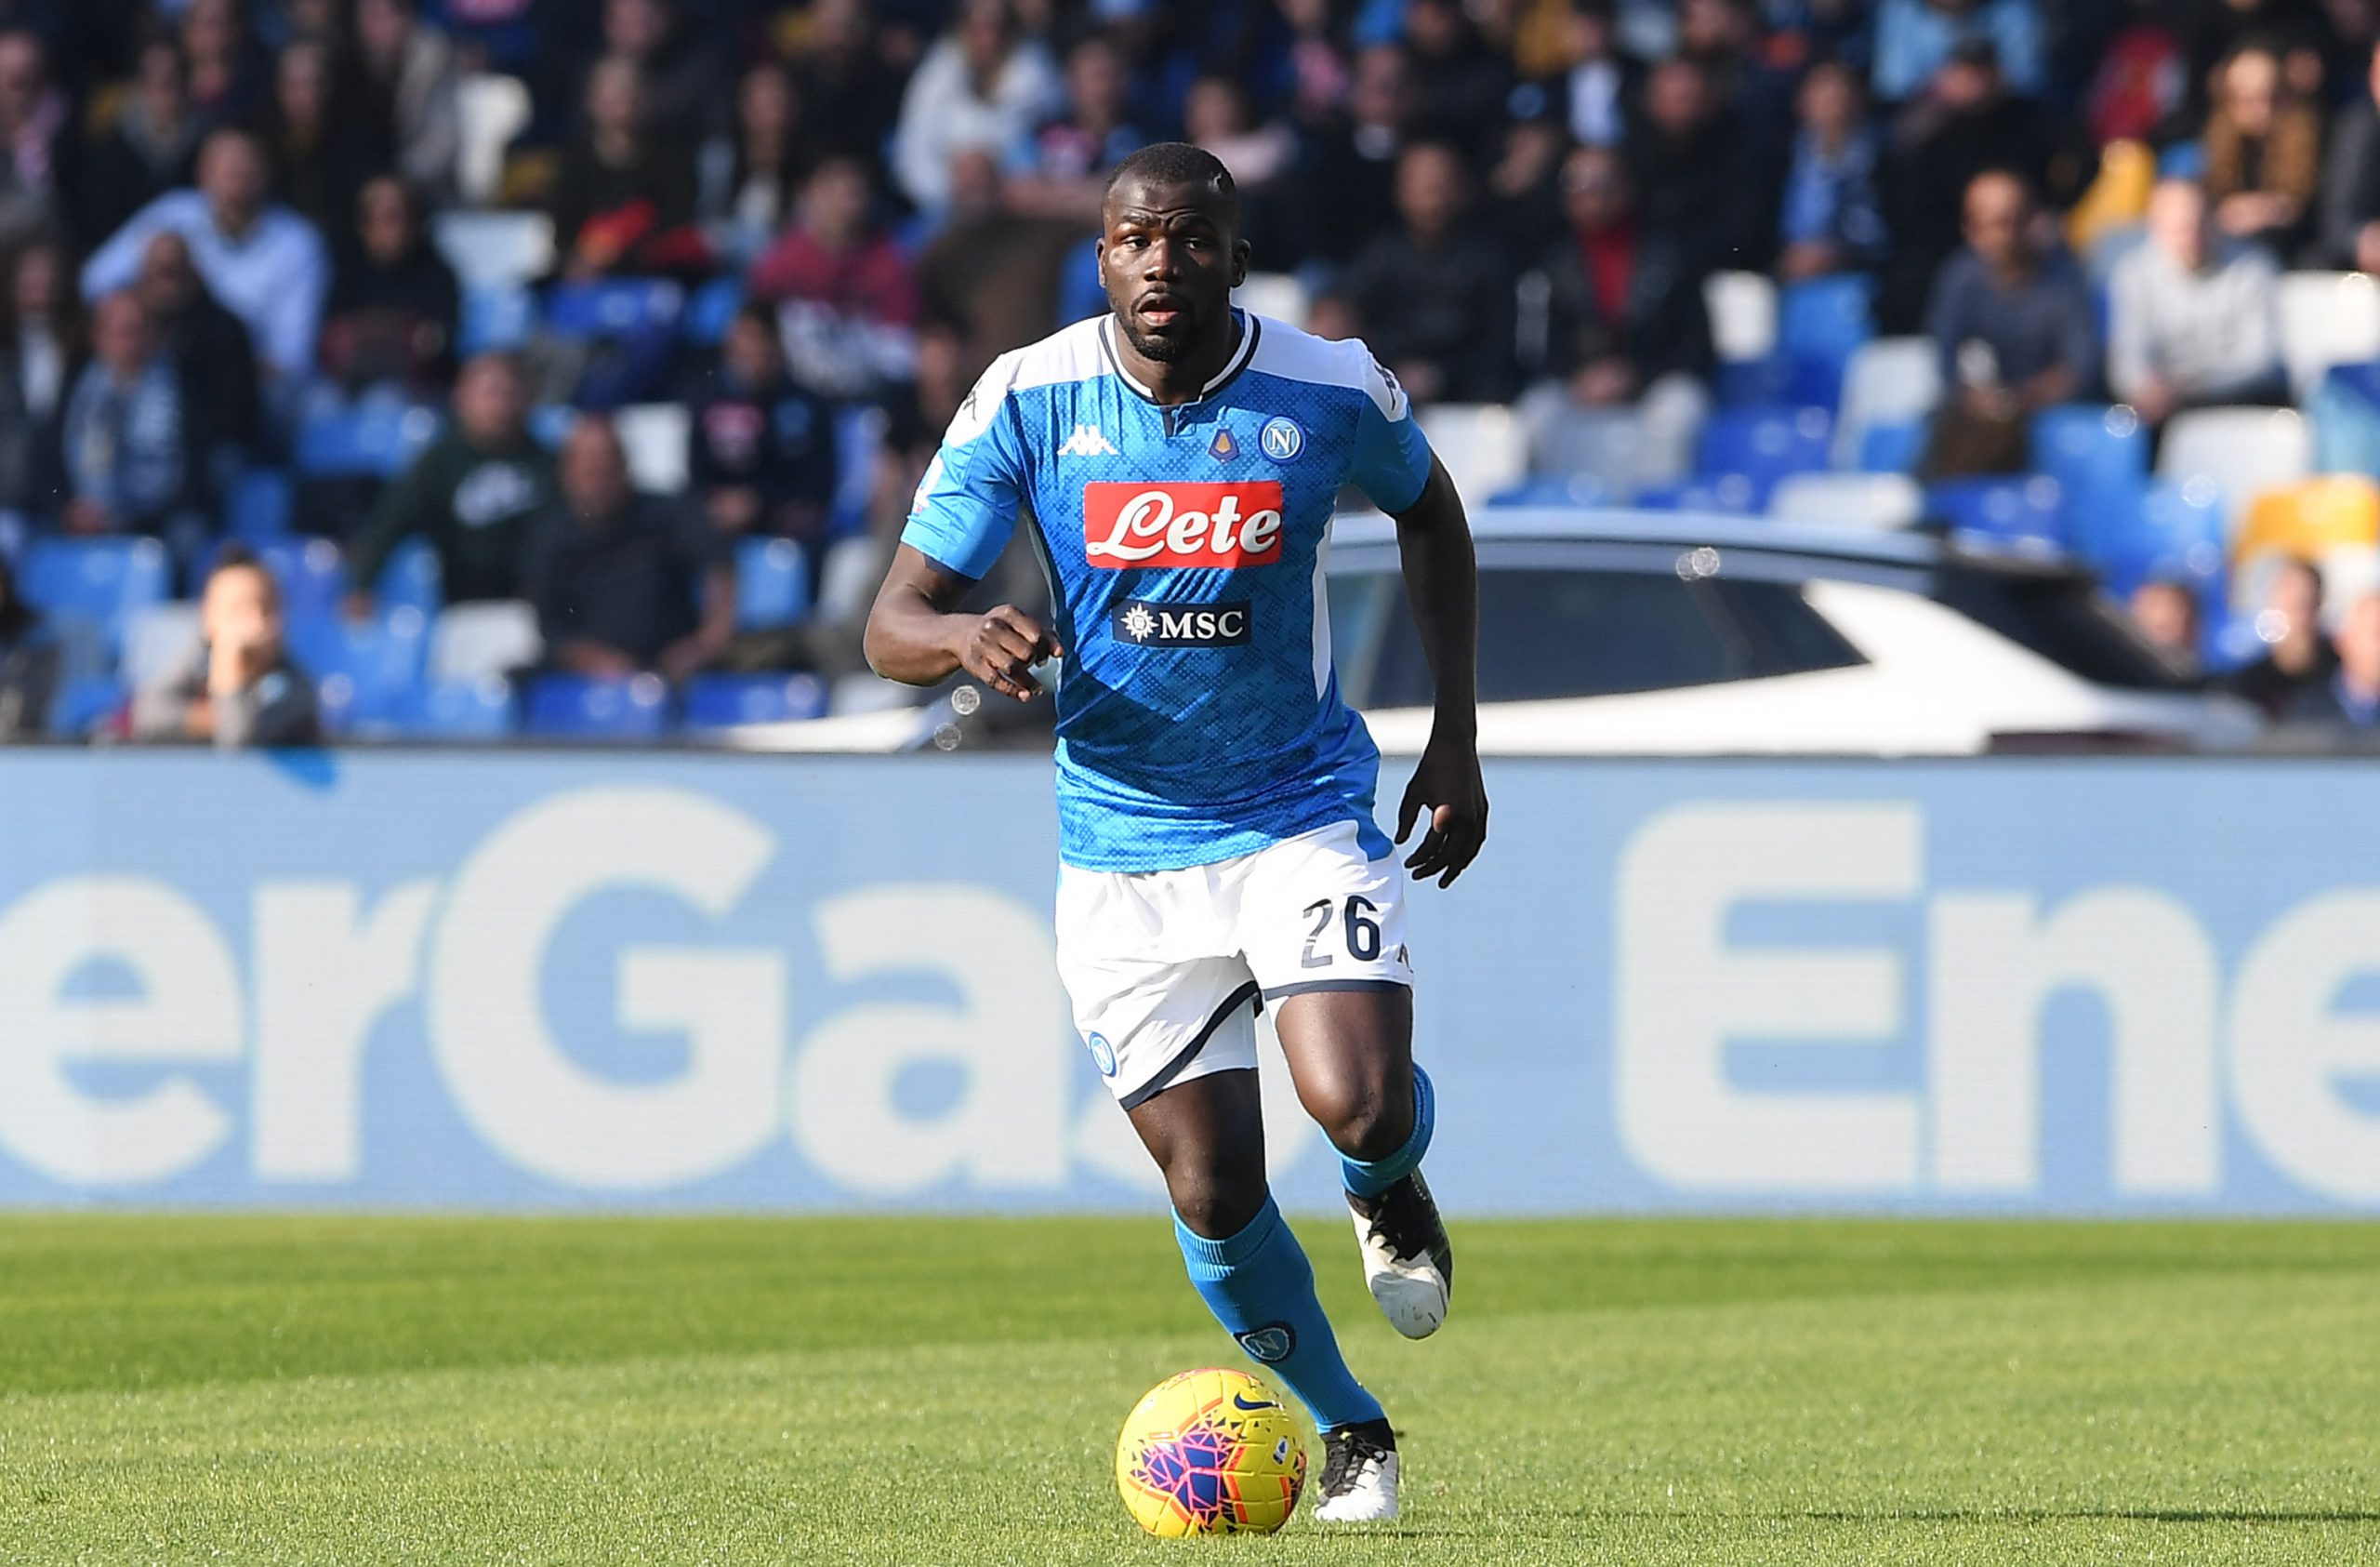 Liverpool are in hot pursuit of Kalidou Koulibaly who is in action in the picture